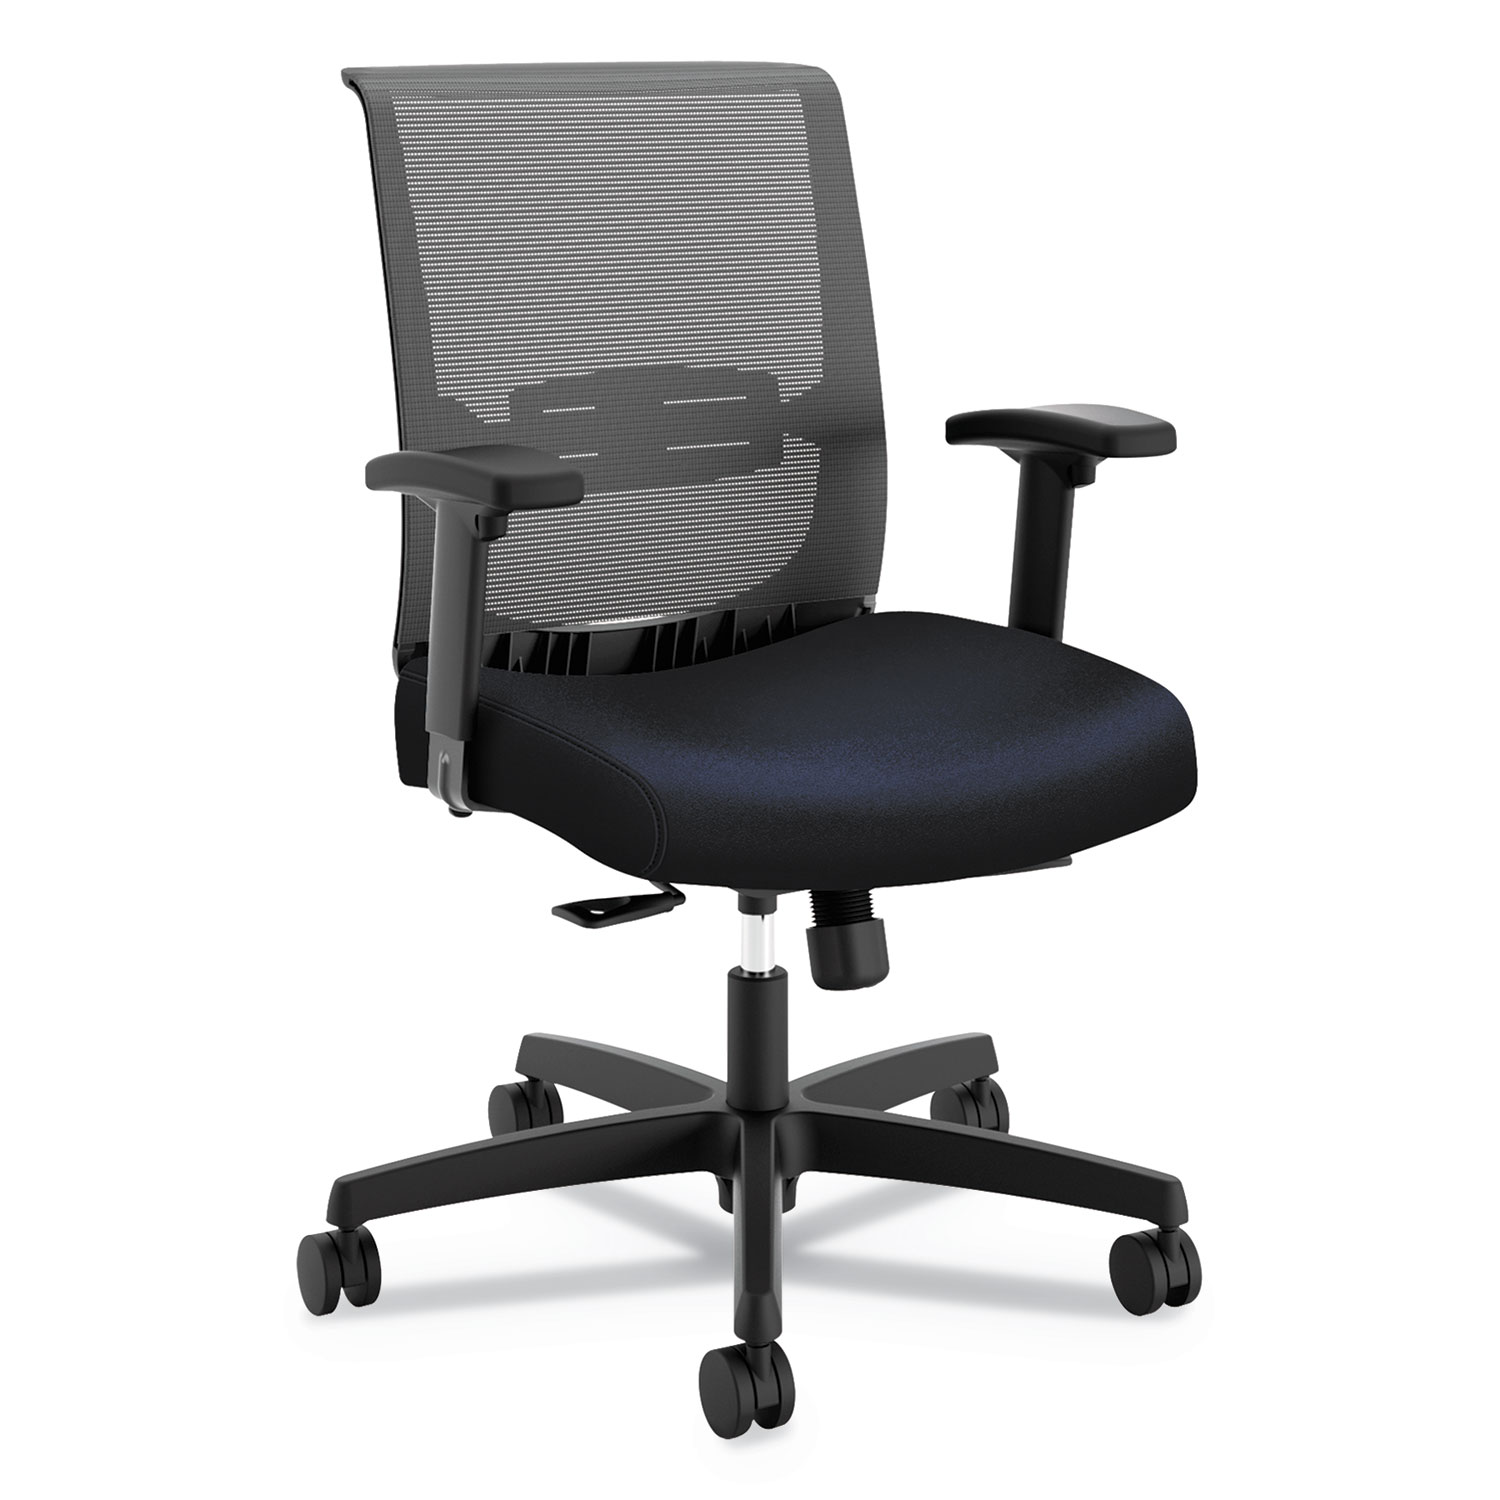  HON HONCMY1ACU98 Convergence Mid-Back Task Chair with Syncho-Tilt Control/Seat Slide, Supports up to 275 lbs, Navy Seat, Black Back/Base (HONCMY1ACU98) 